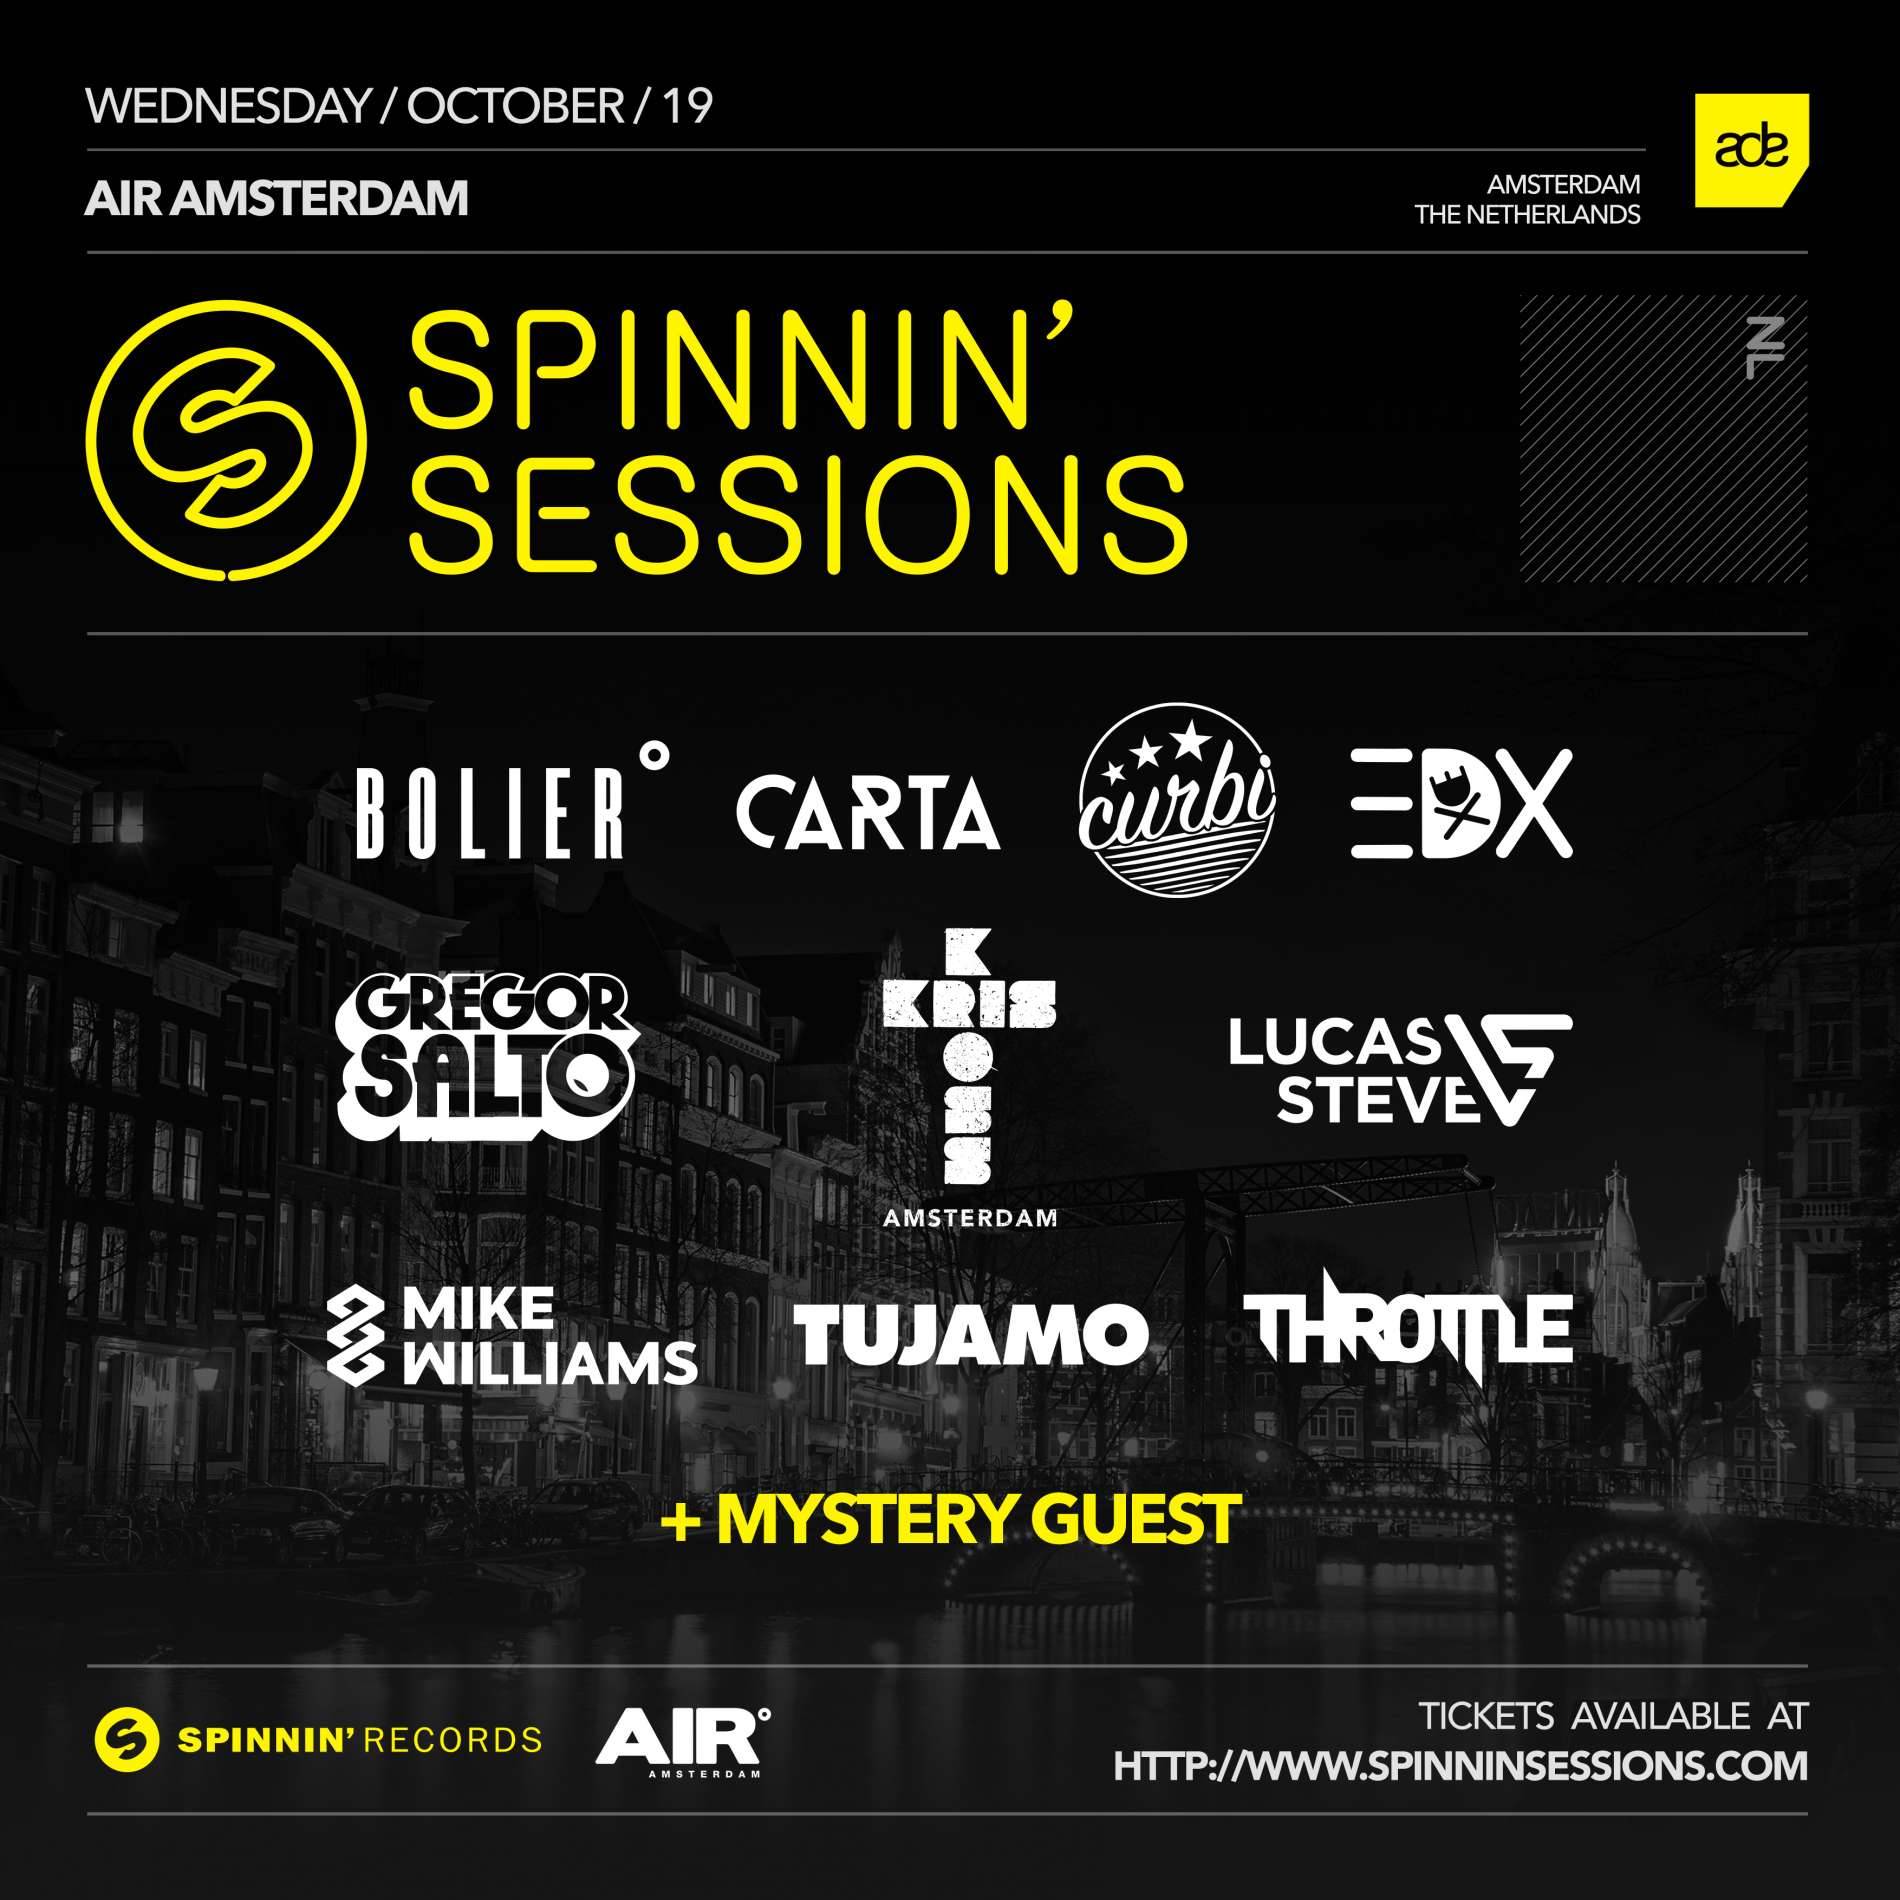 Here's the Spinnin' Sessions ADE line-up - get warmed up!